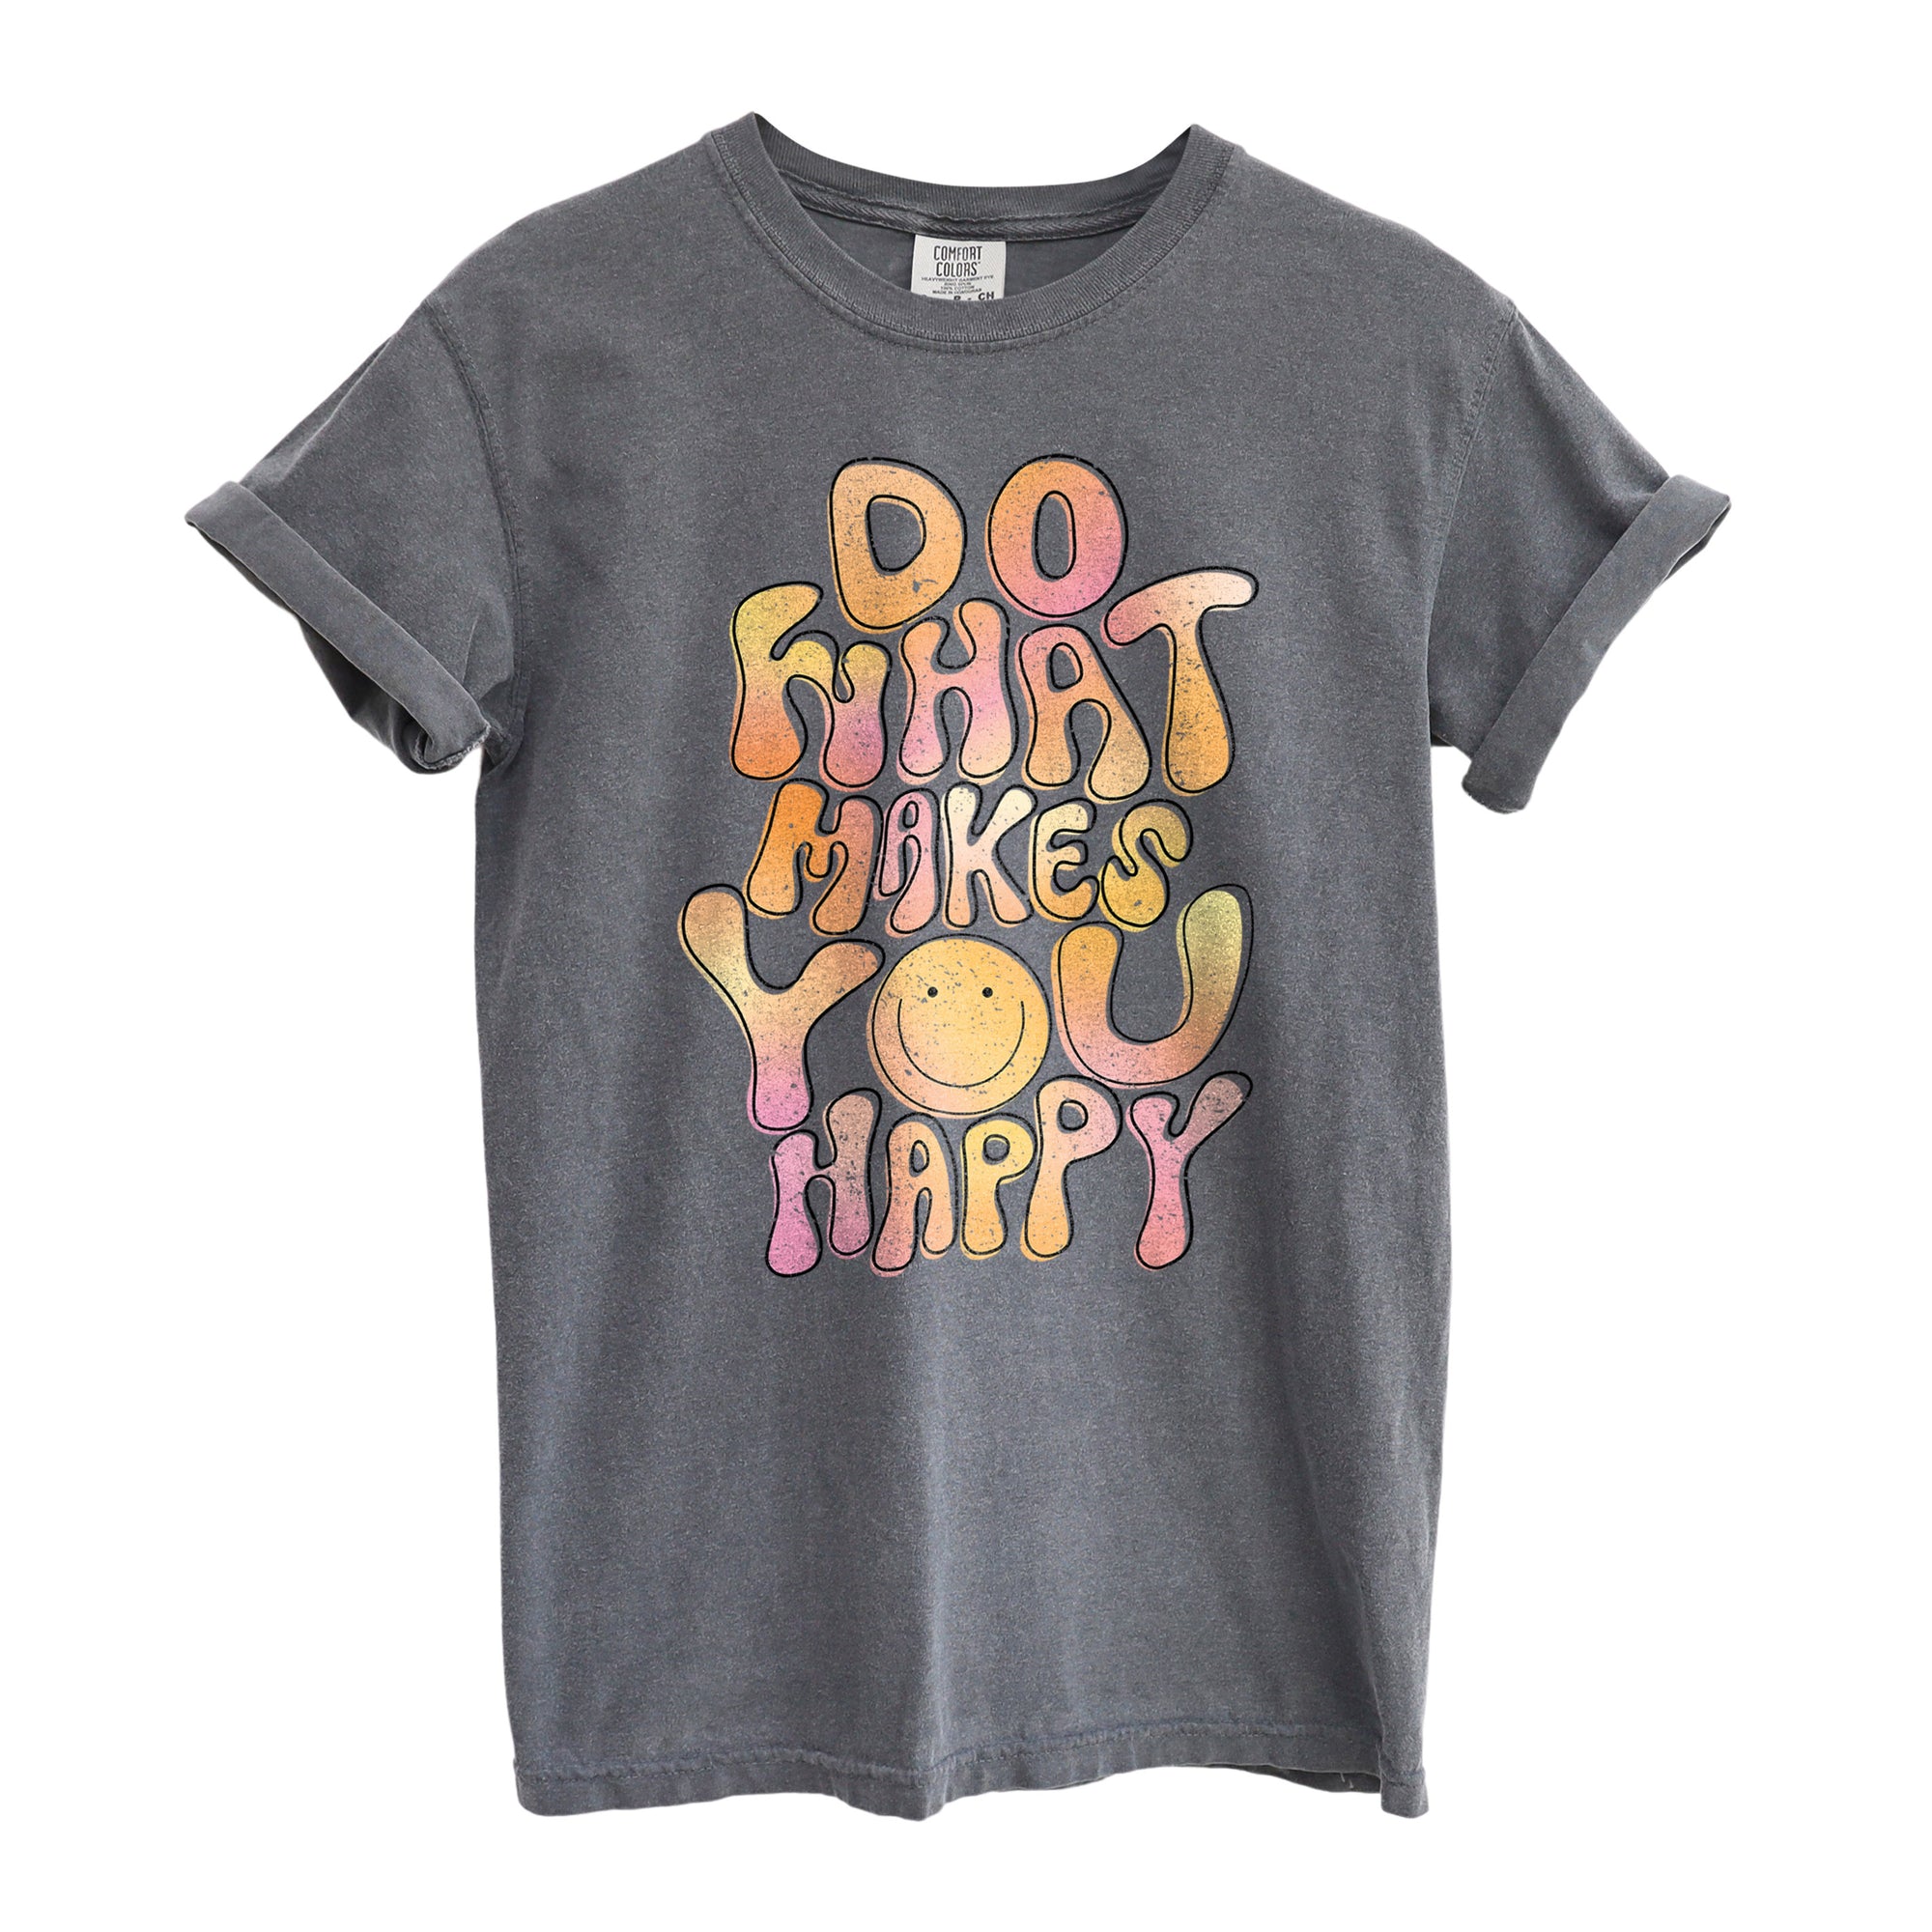 Do What Makes You Happy Oversized Shirt for Women & Men Garment-Dyed Graphic Tee